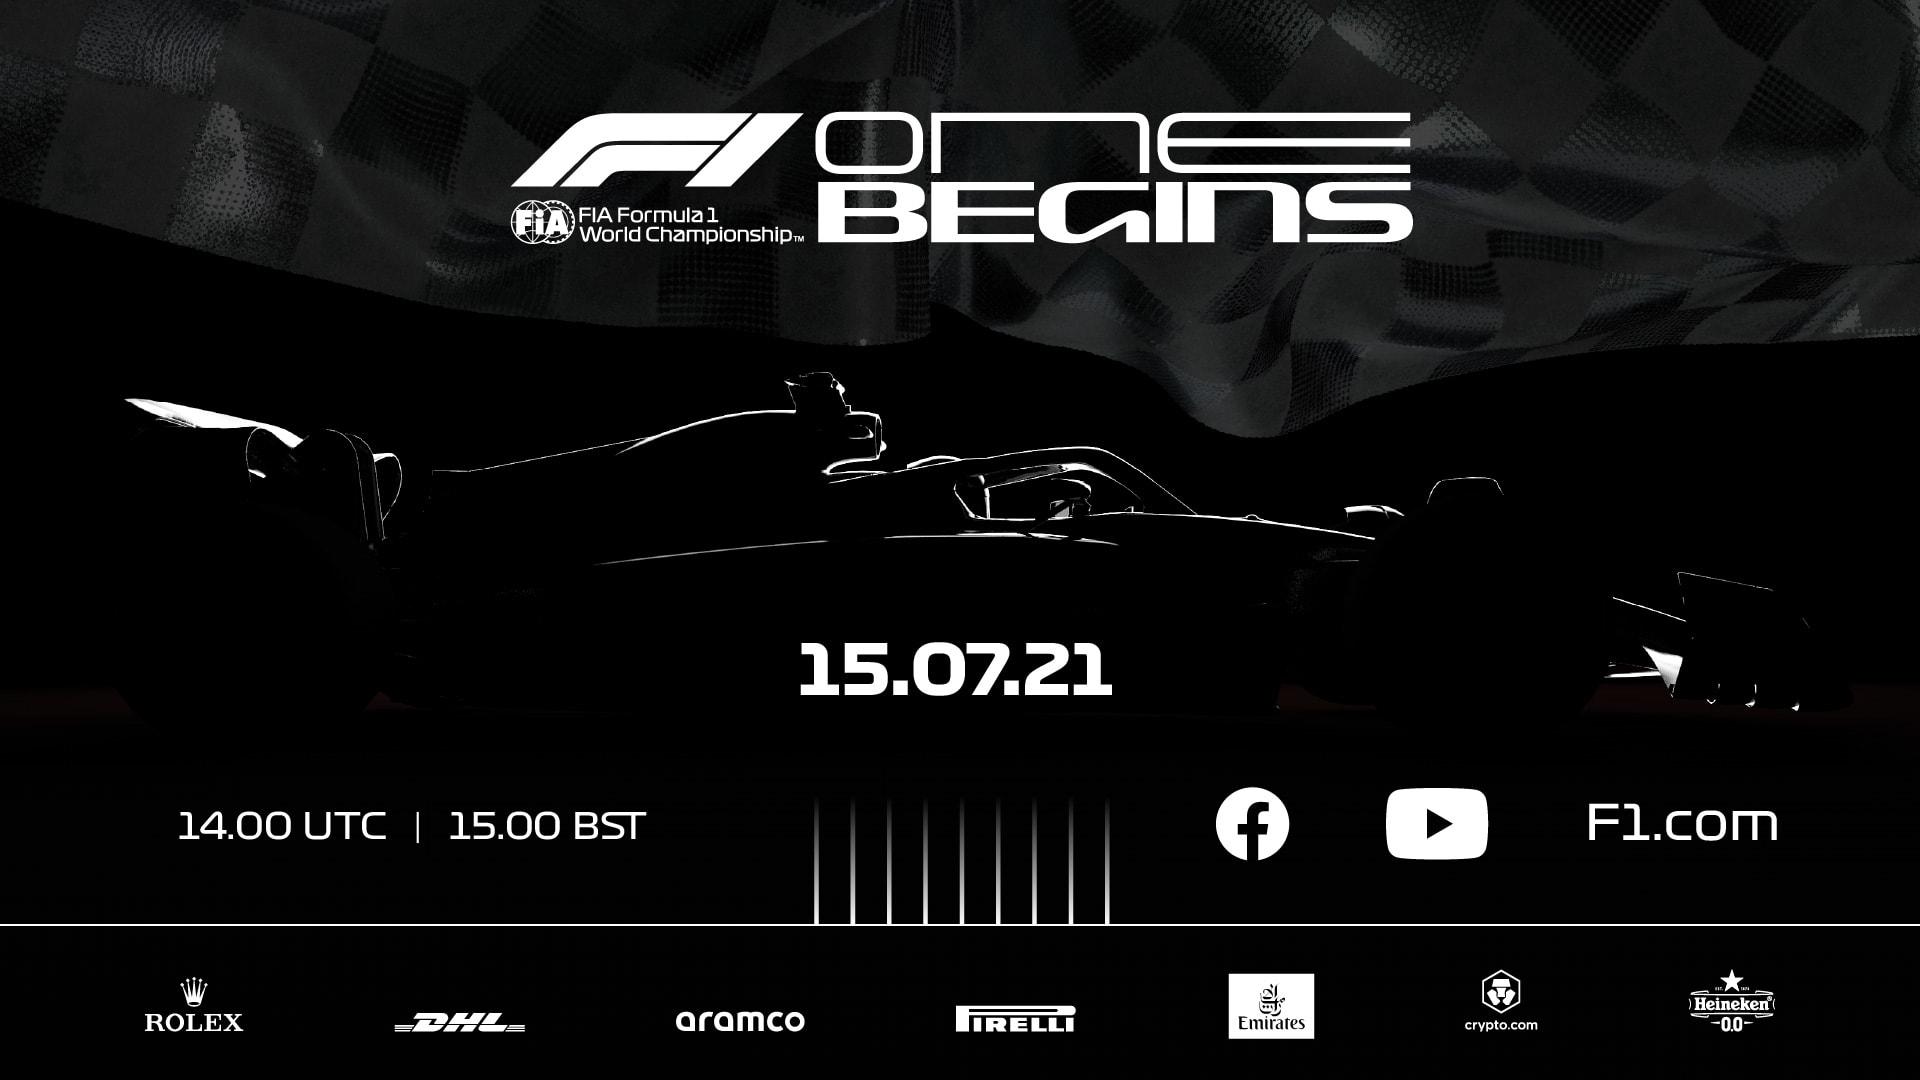 Don't miss the beginning of a whole new era: See a full-size 2022 F1 car  for the first time this Thursday